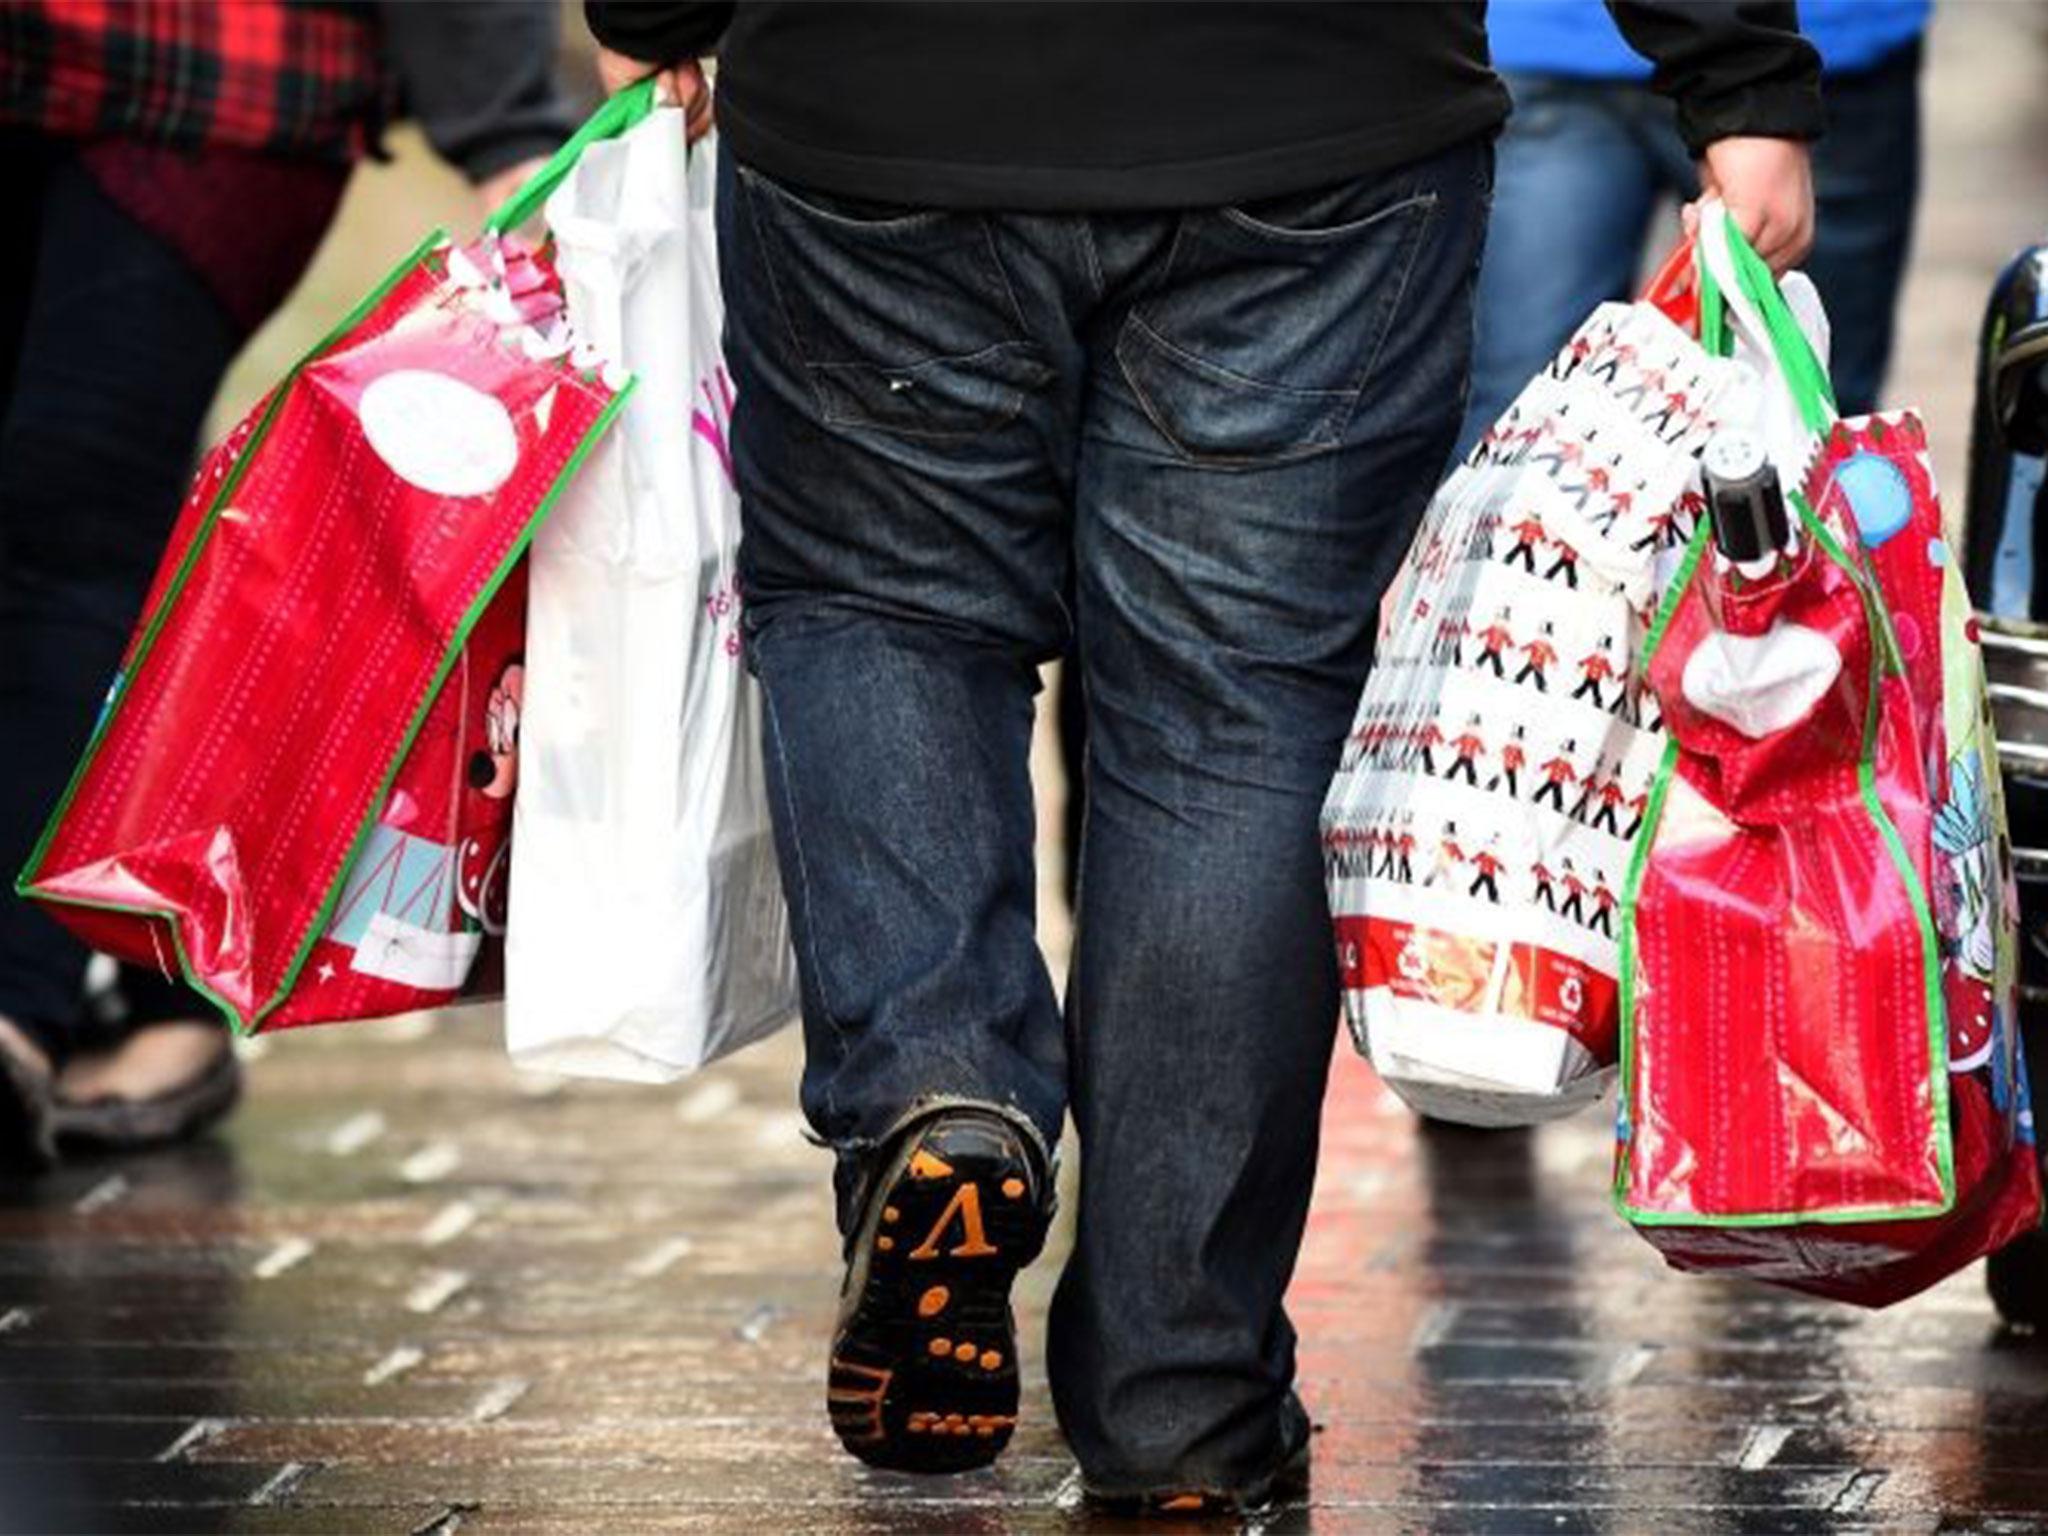 Overall spending in the final few days before Christmas is expected to be 7 per cent higher than last year, with many consumers getting into debt to fund it